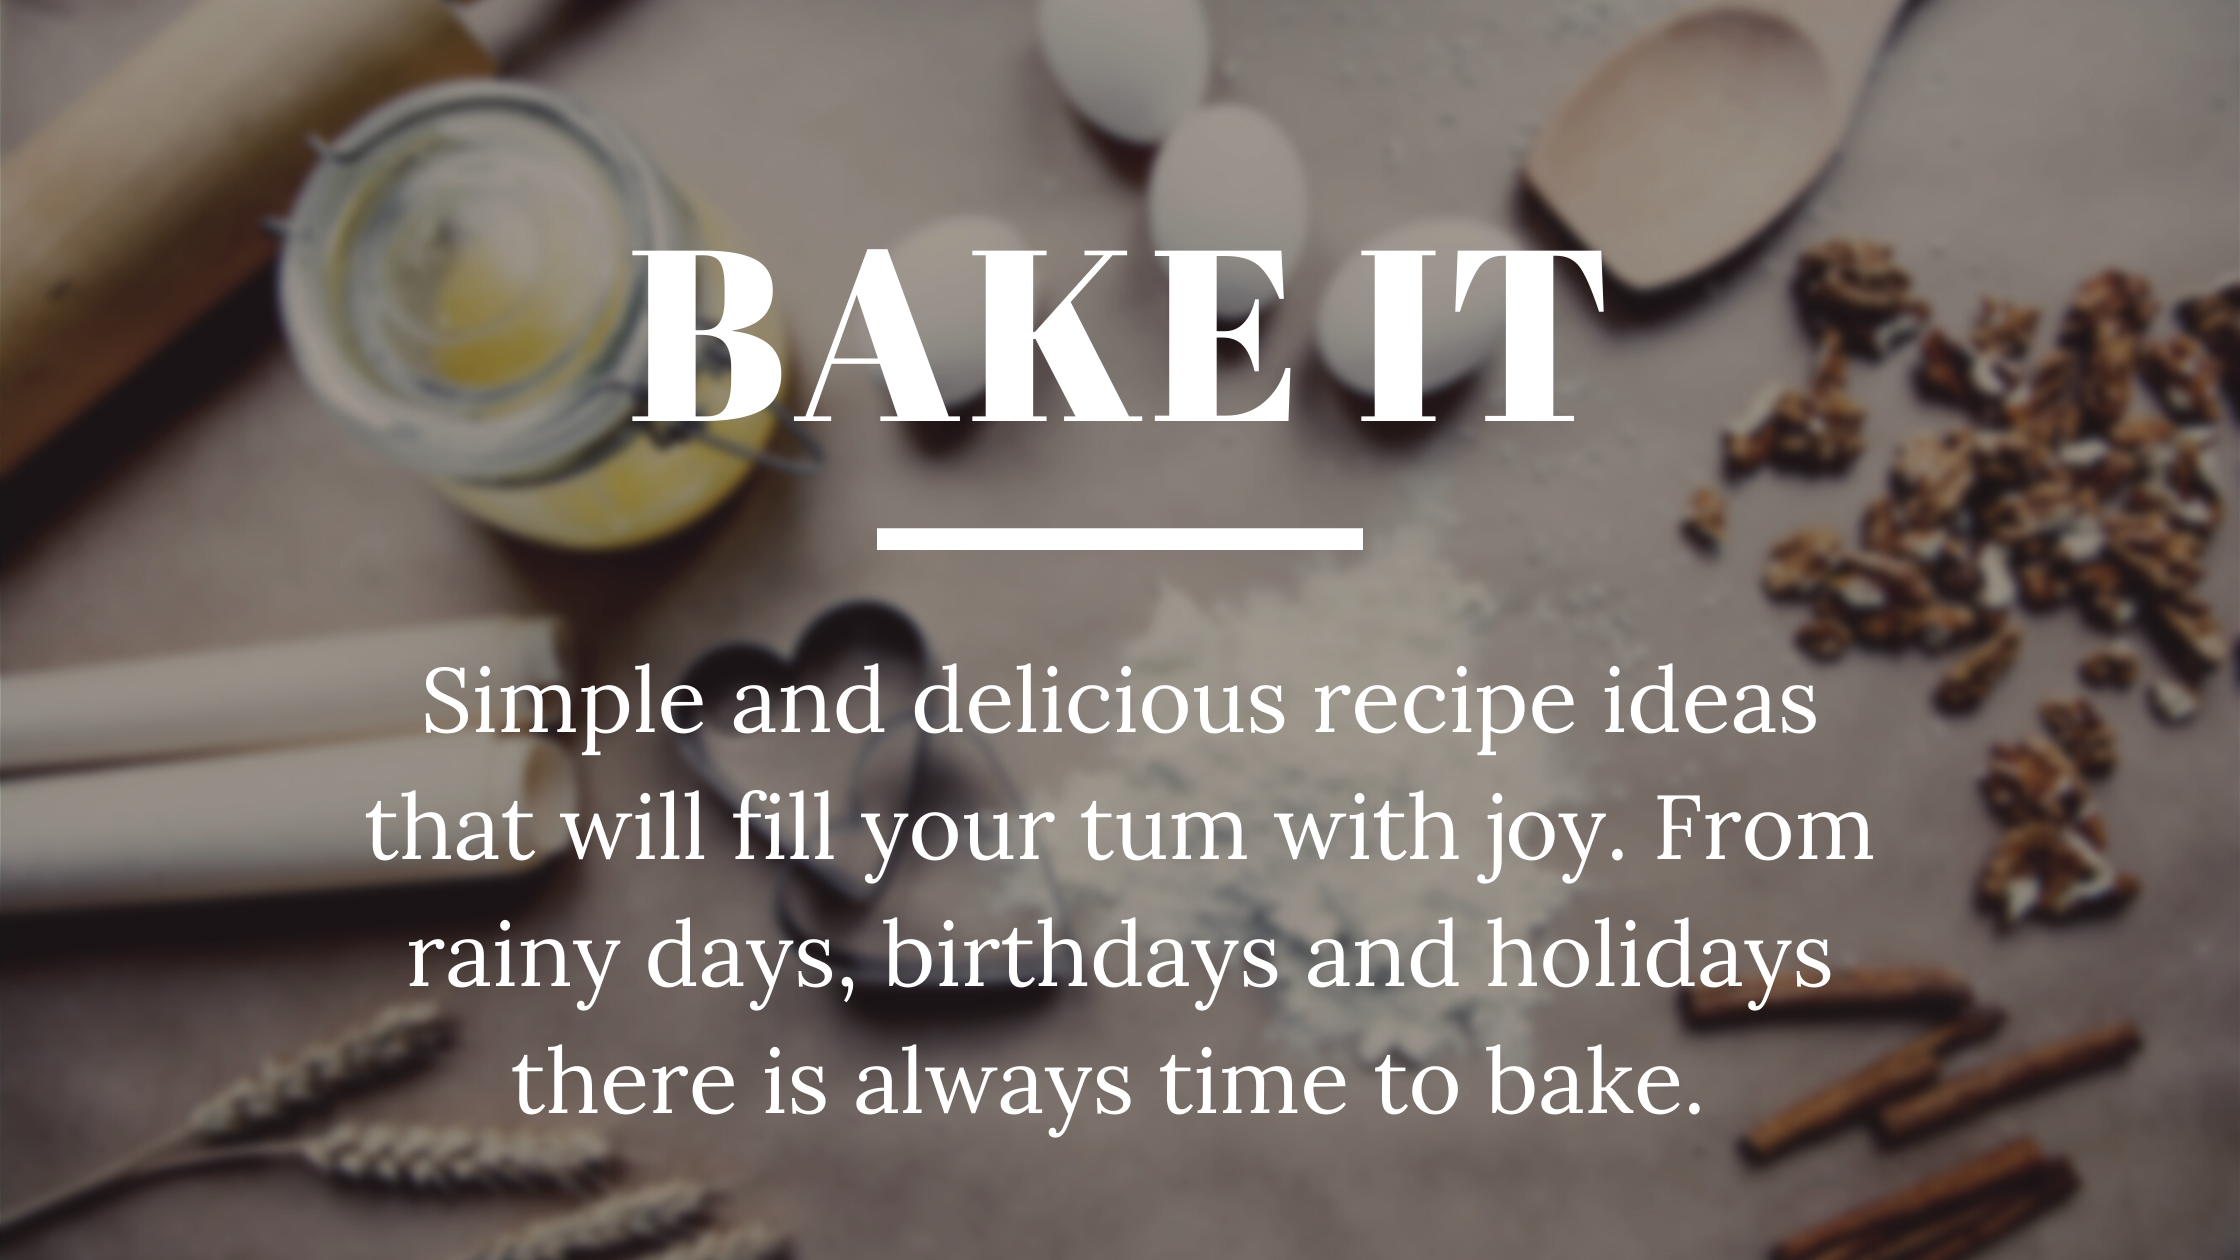 Bake it - simple and delicious recipe ideas to fill your tum with joy. From rainy days, birthdays and holidays, there is always time to bake